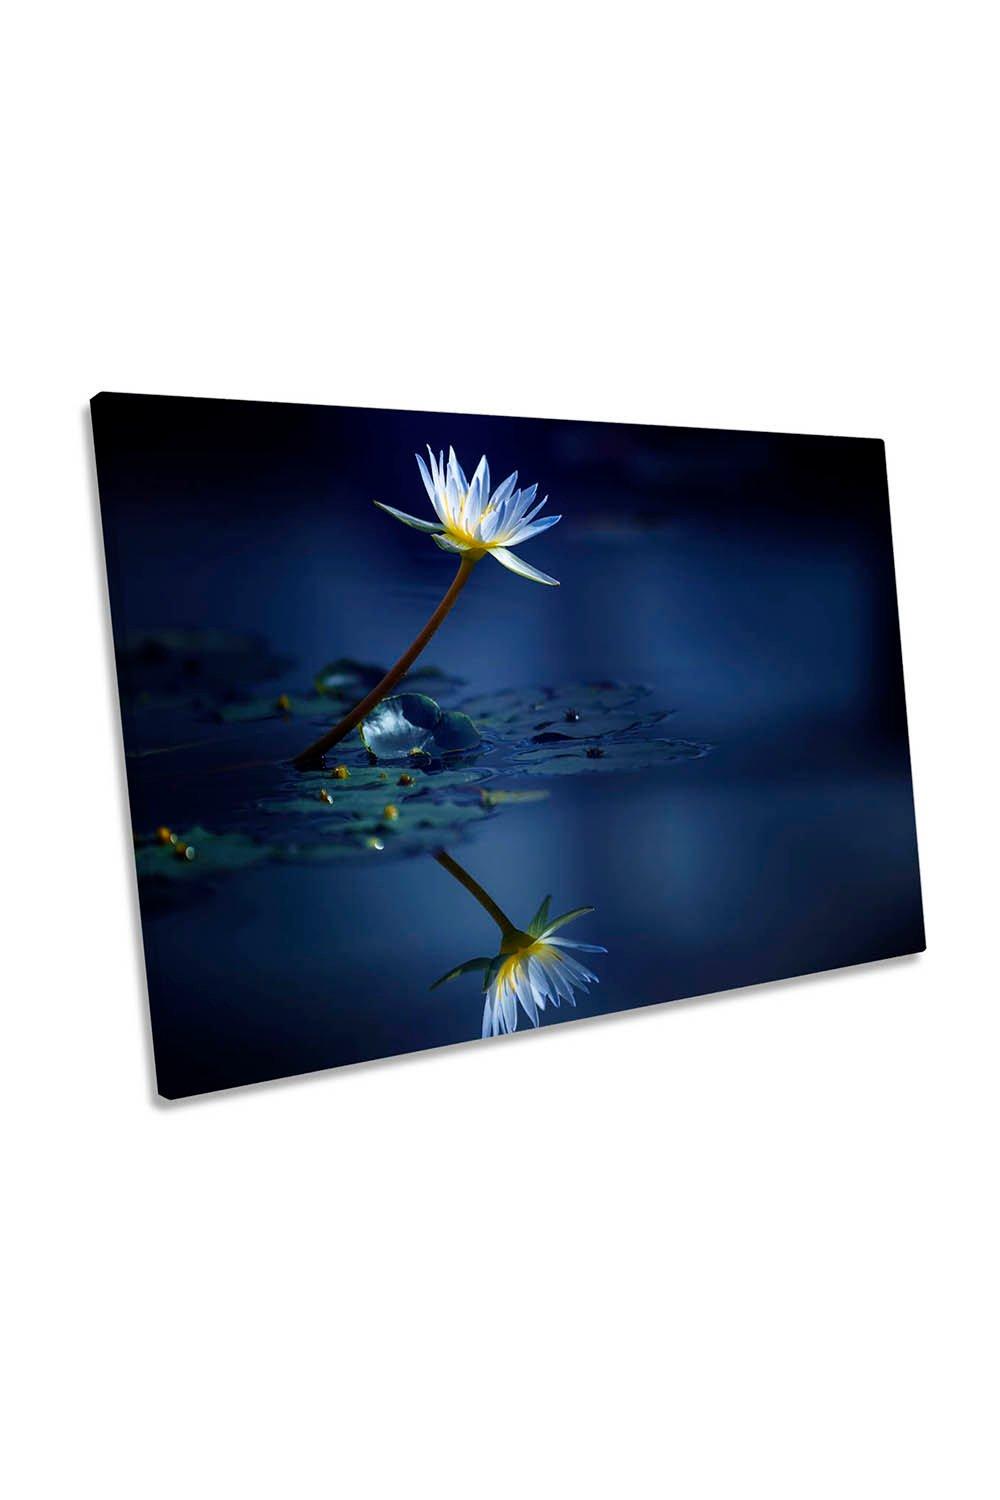 Water Lilly Blue Flower Floral Canvas Wall Art Picture Print